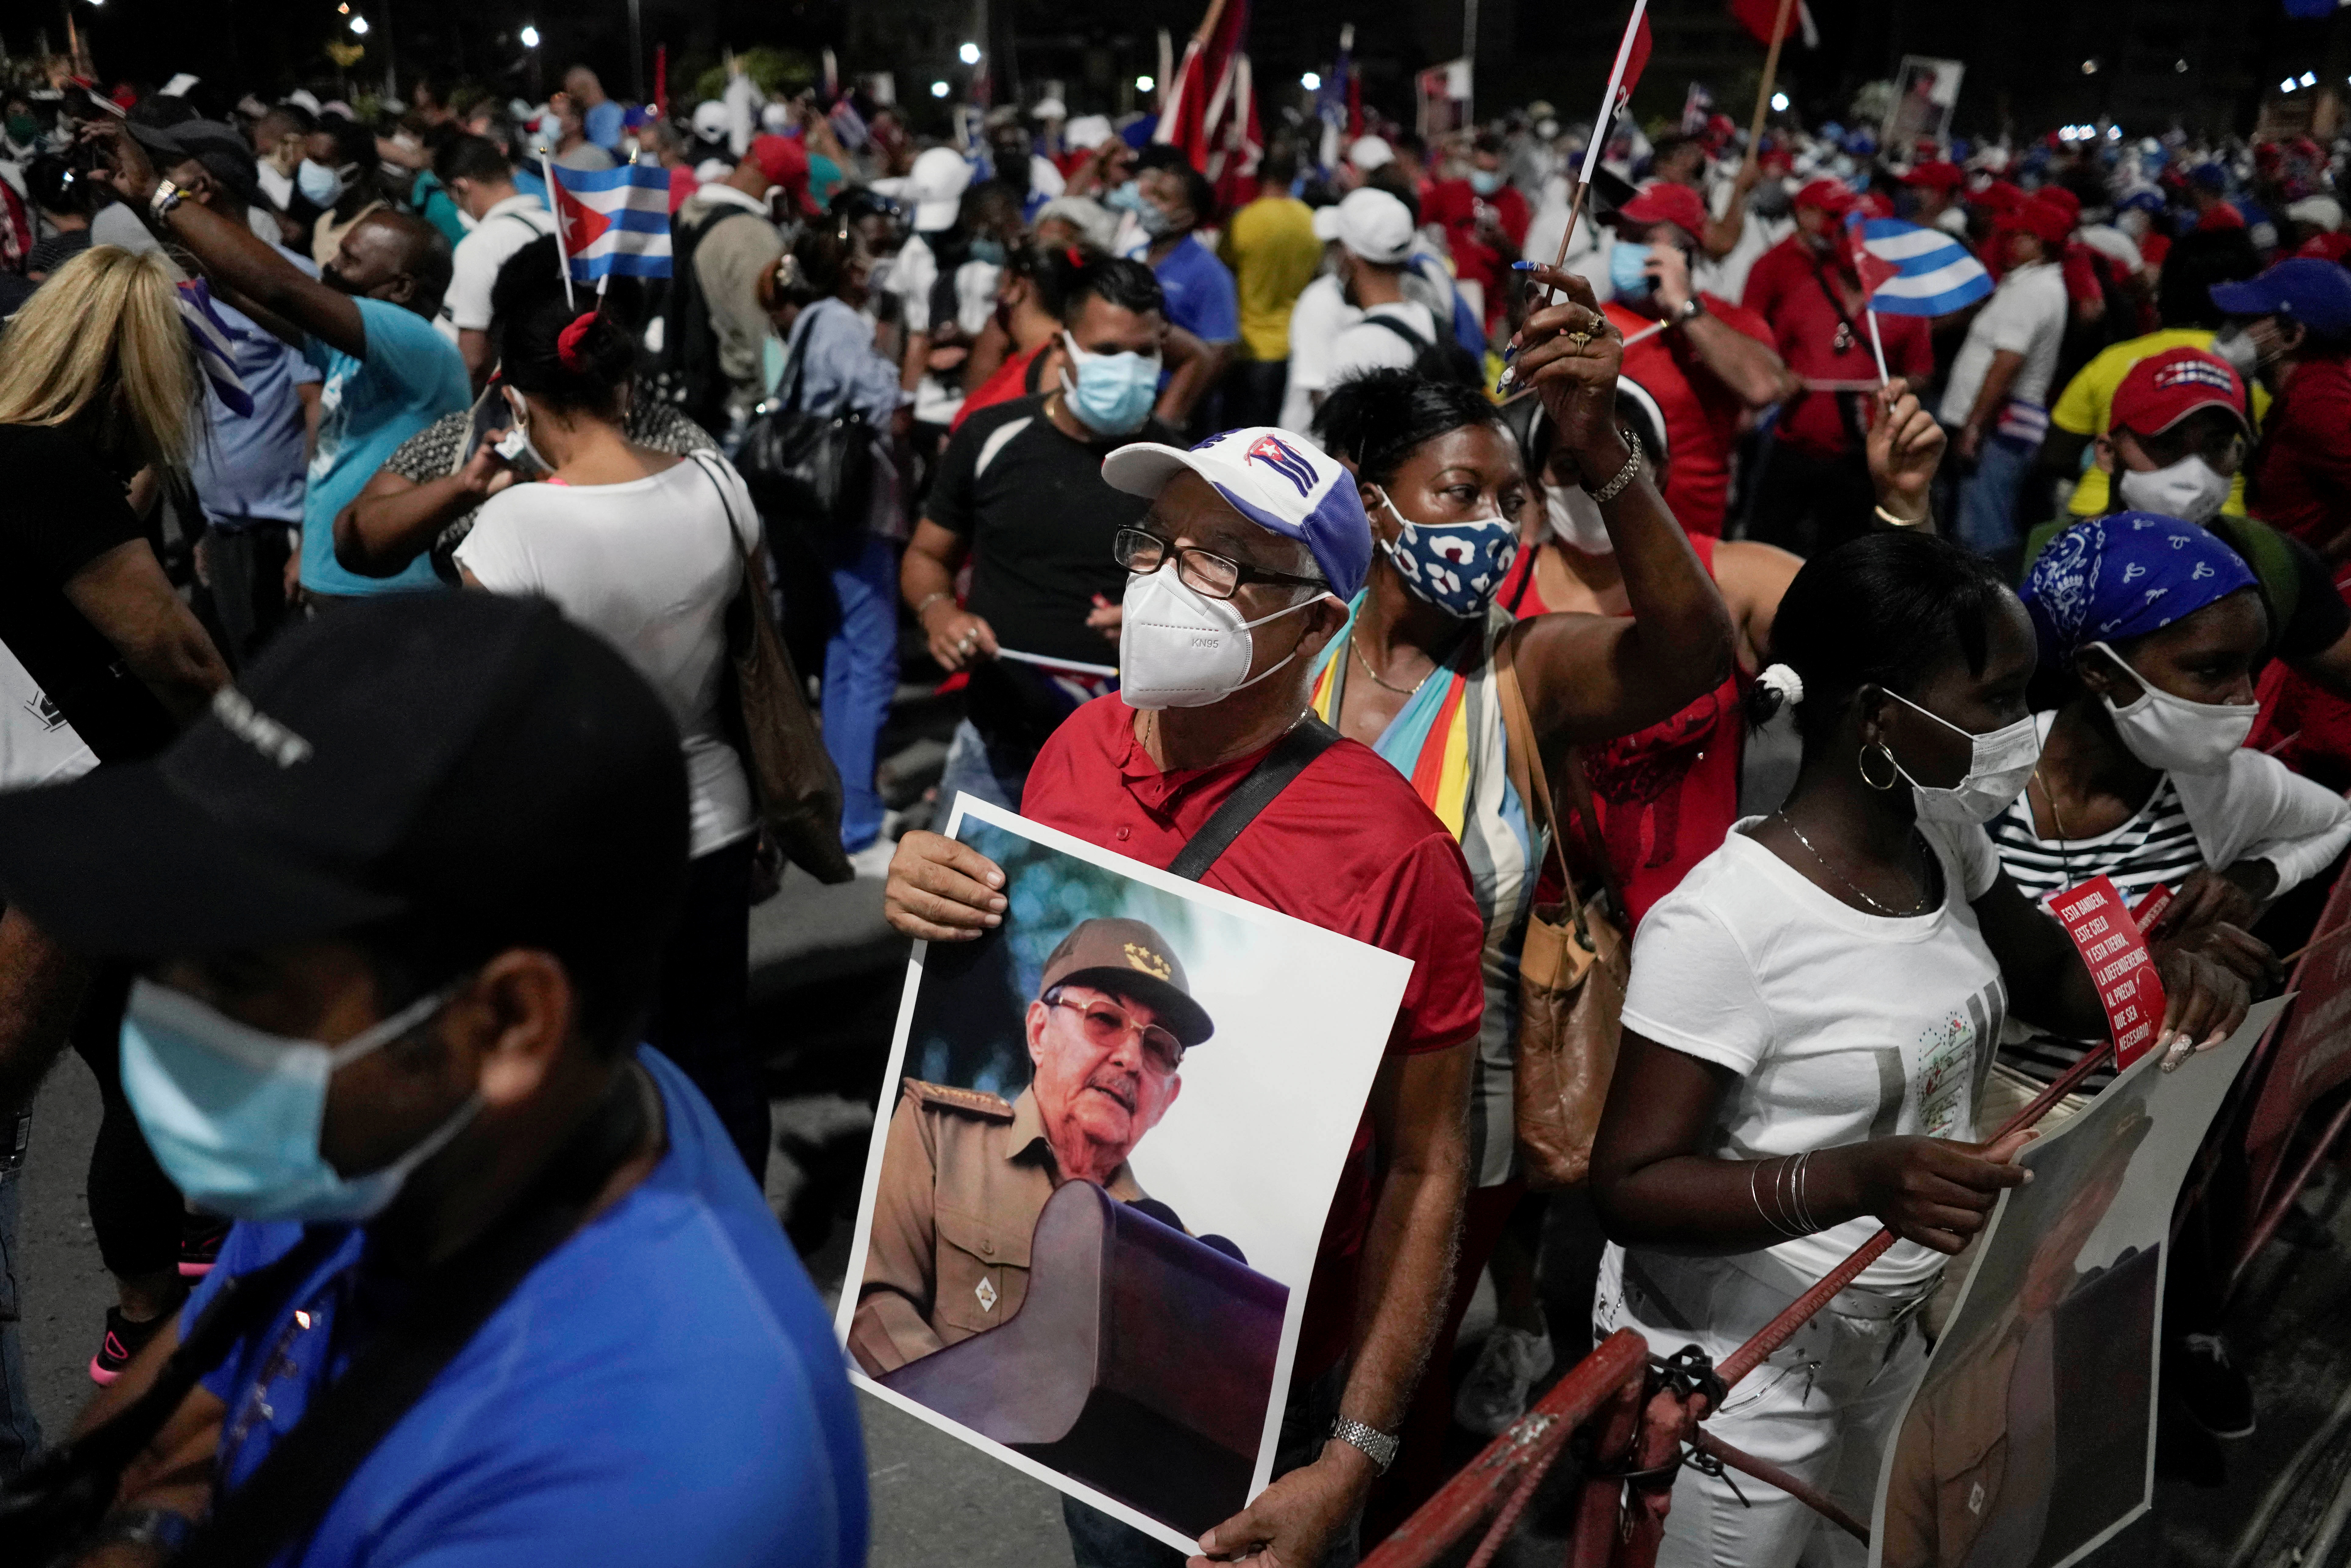 A man holds an image of Raul Castro durig a rally in Havana